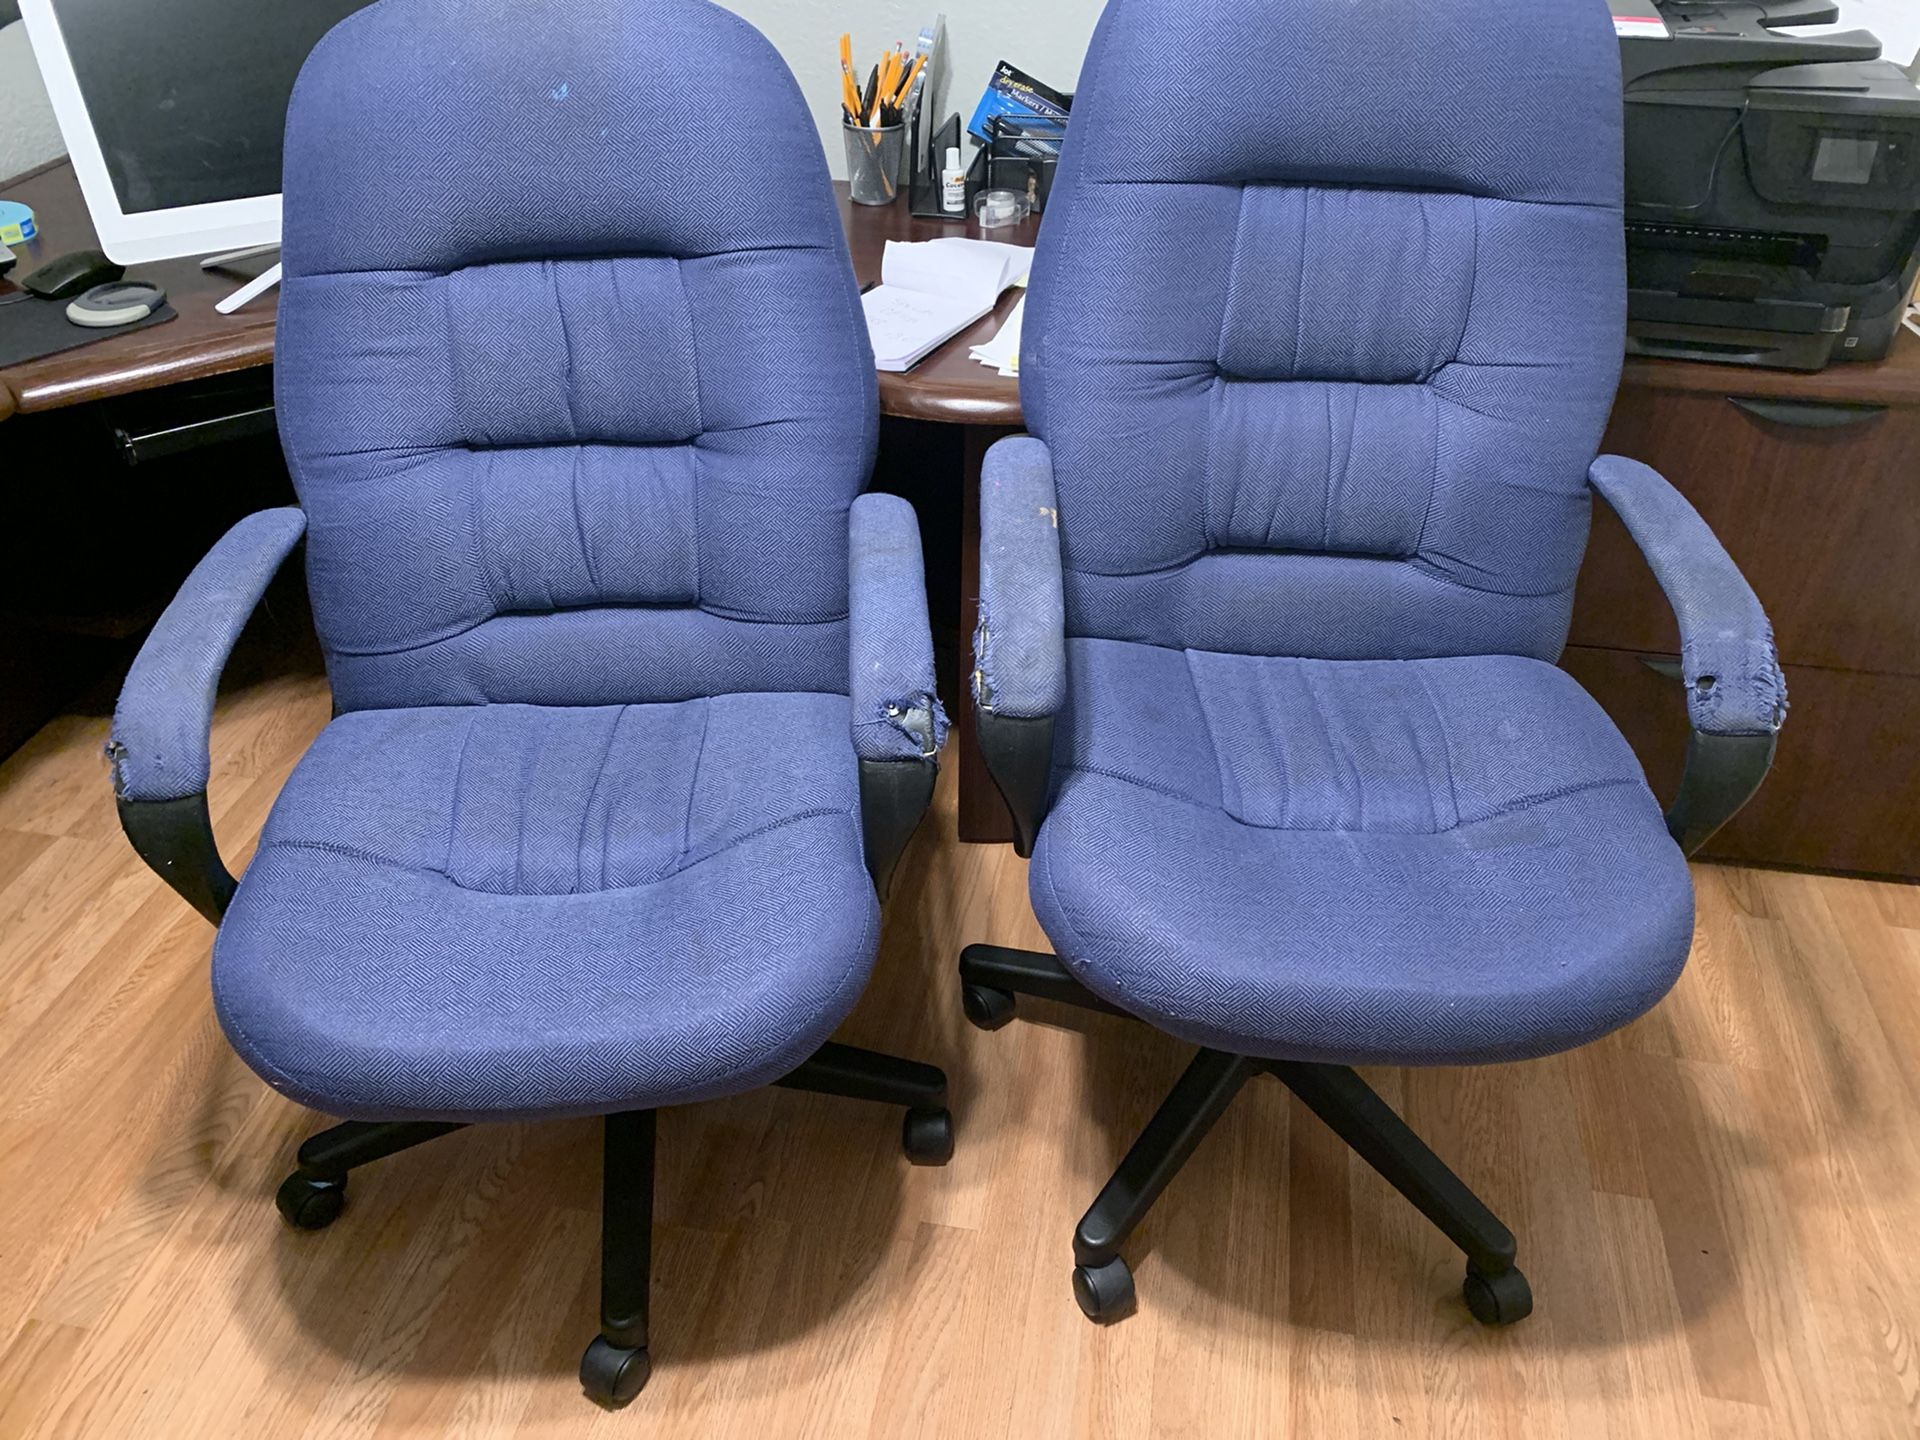 Rolling office chairs off for 25 needs a little TLC